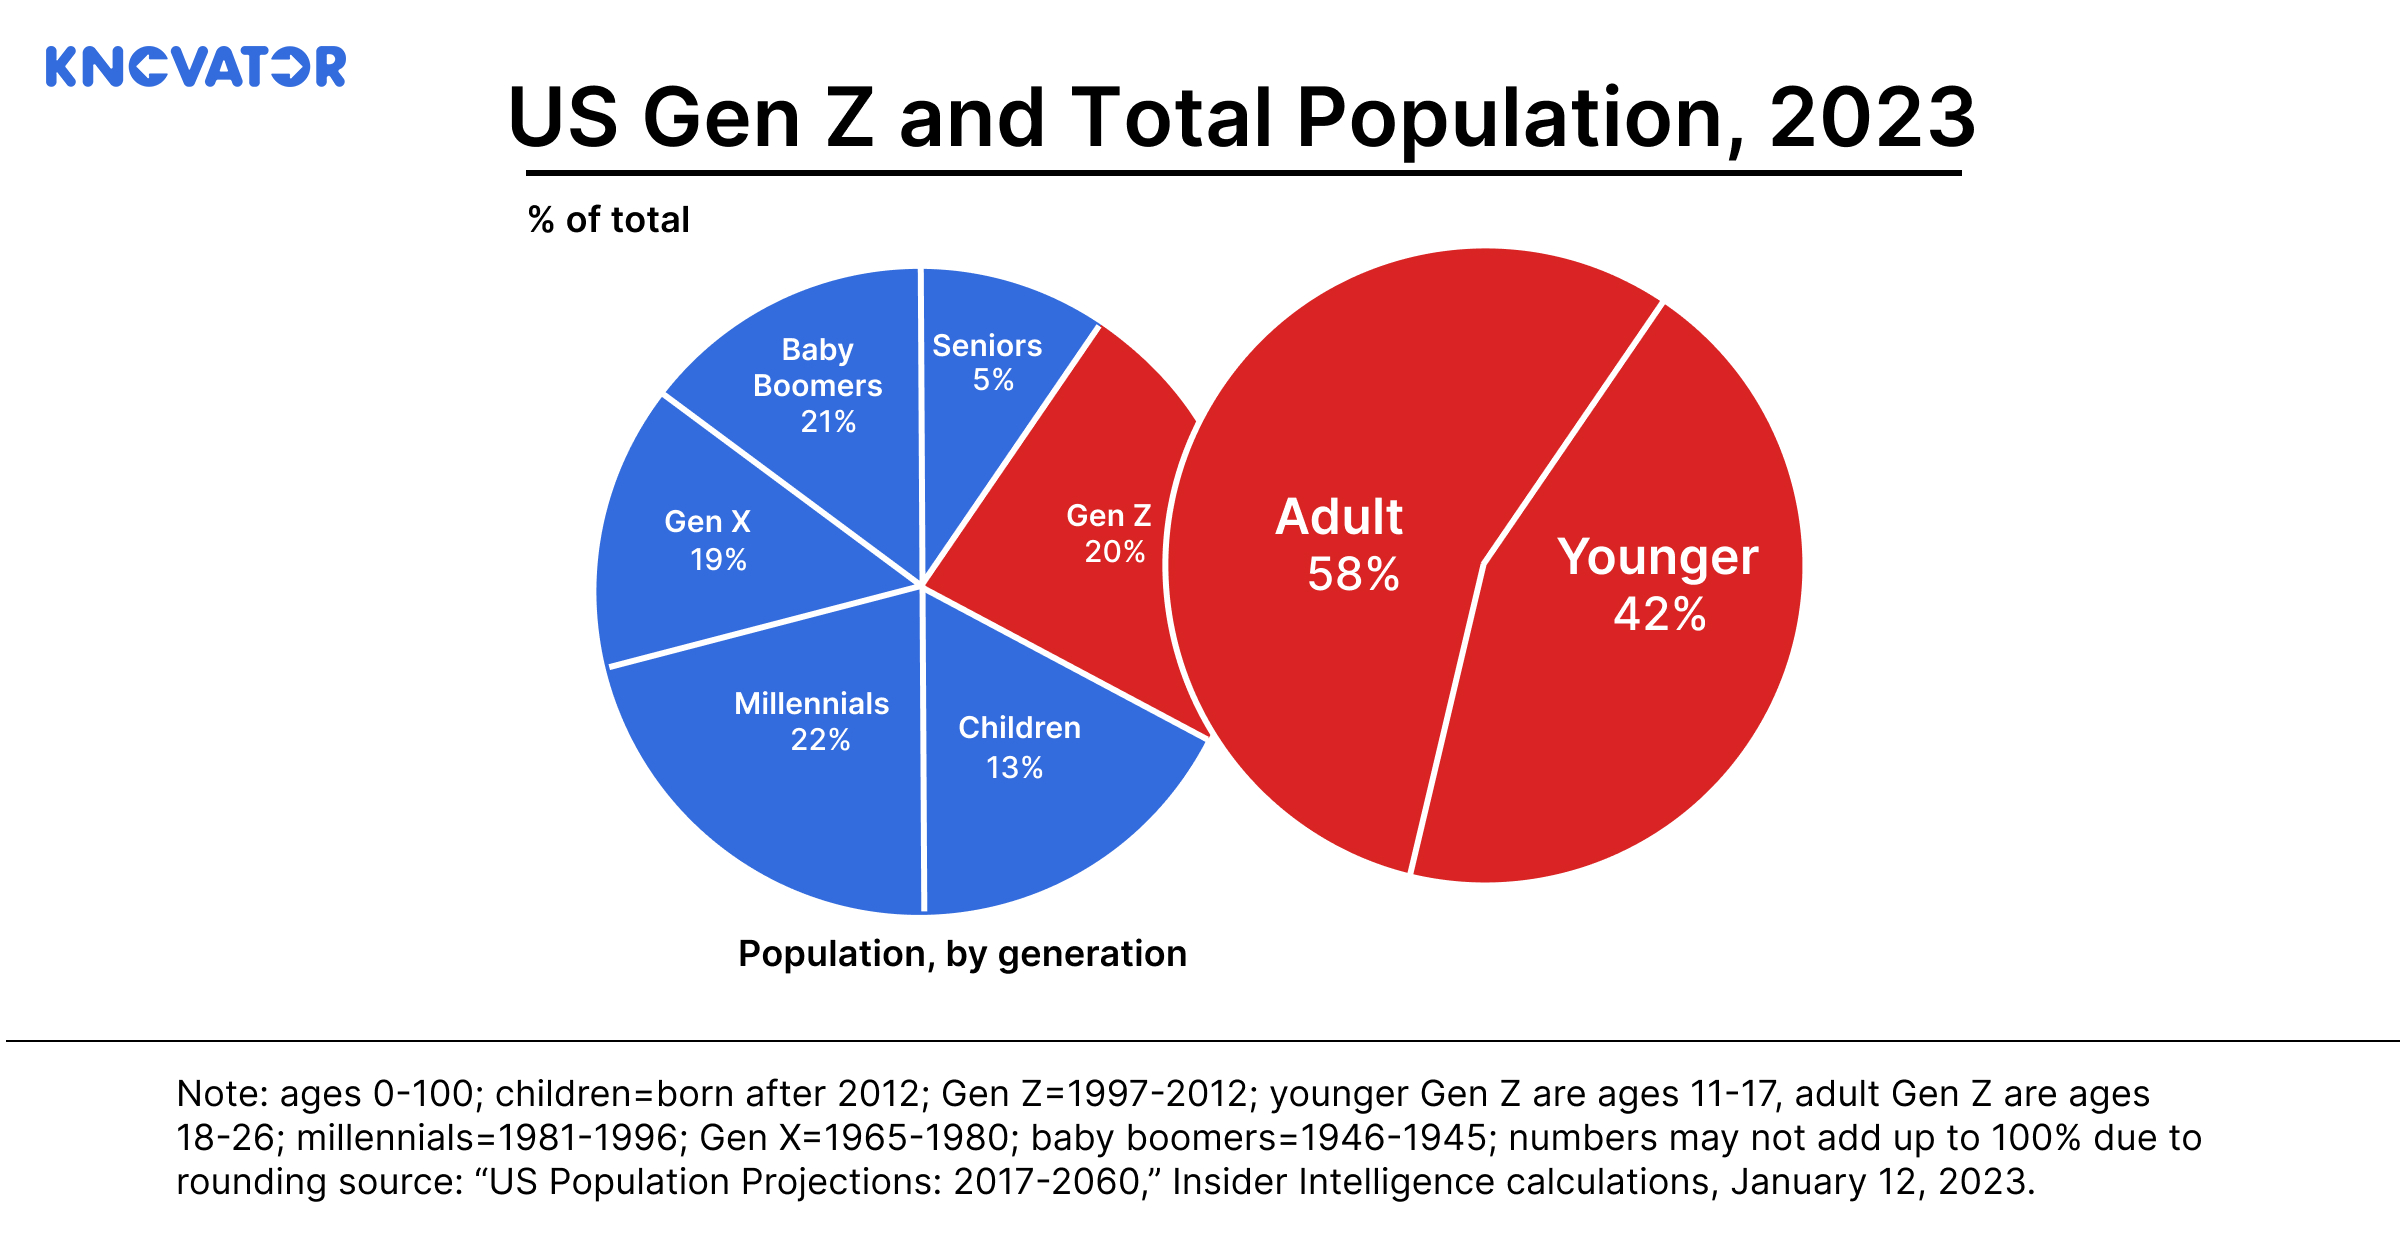 A pie chart visualizing the projected population distribution